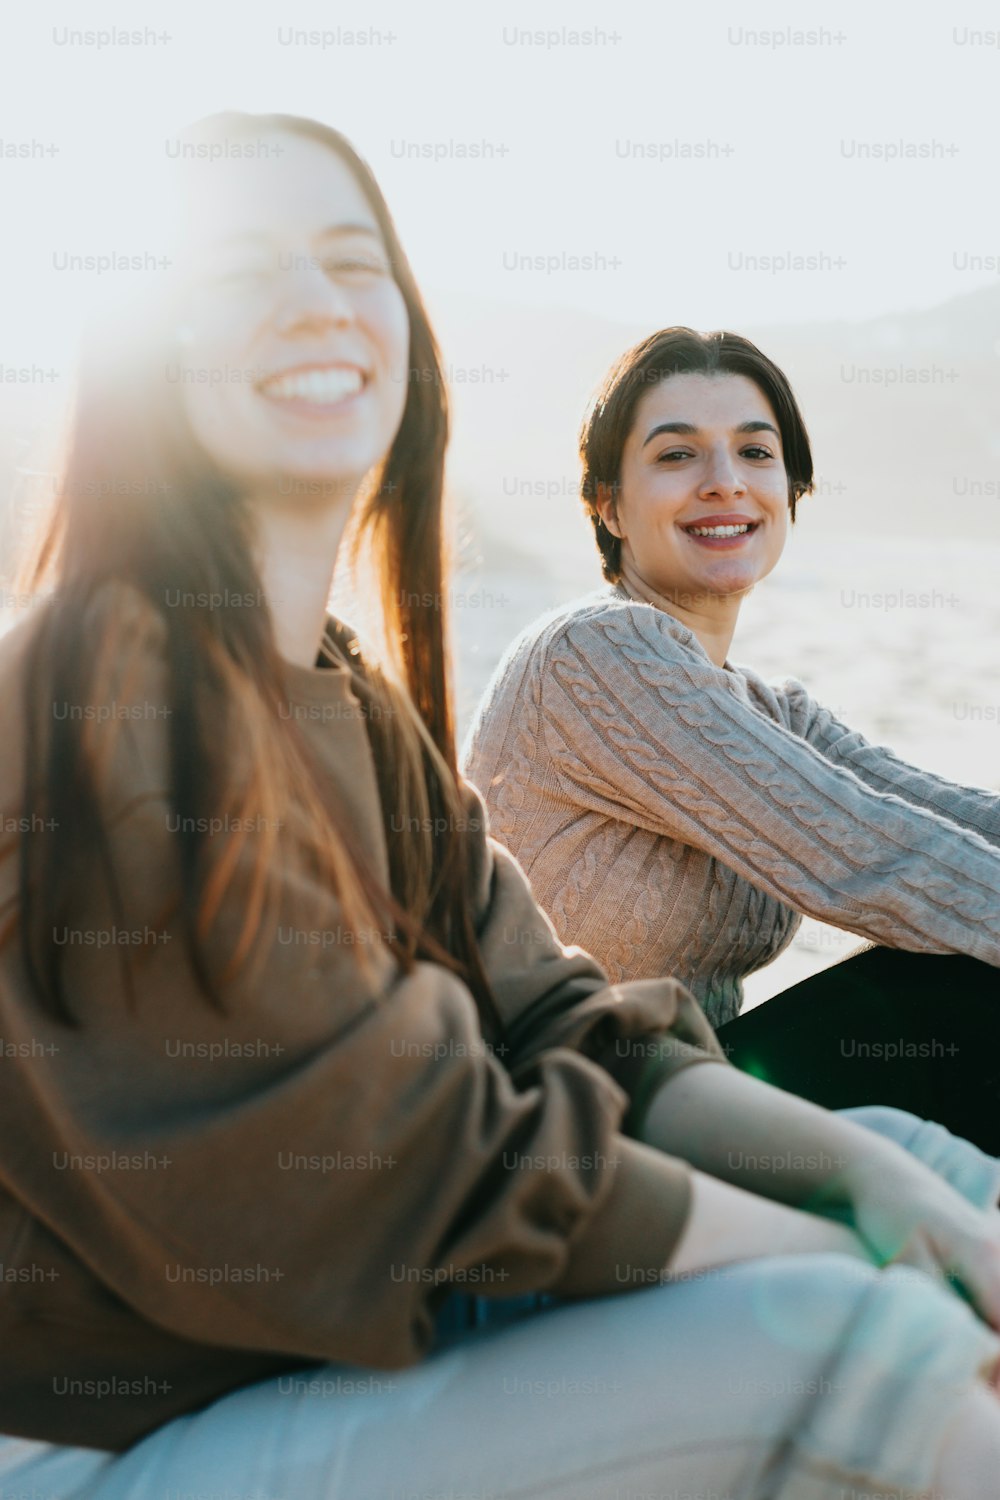 two women sitting on the beach smiling for the camera